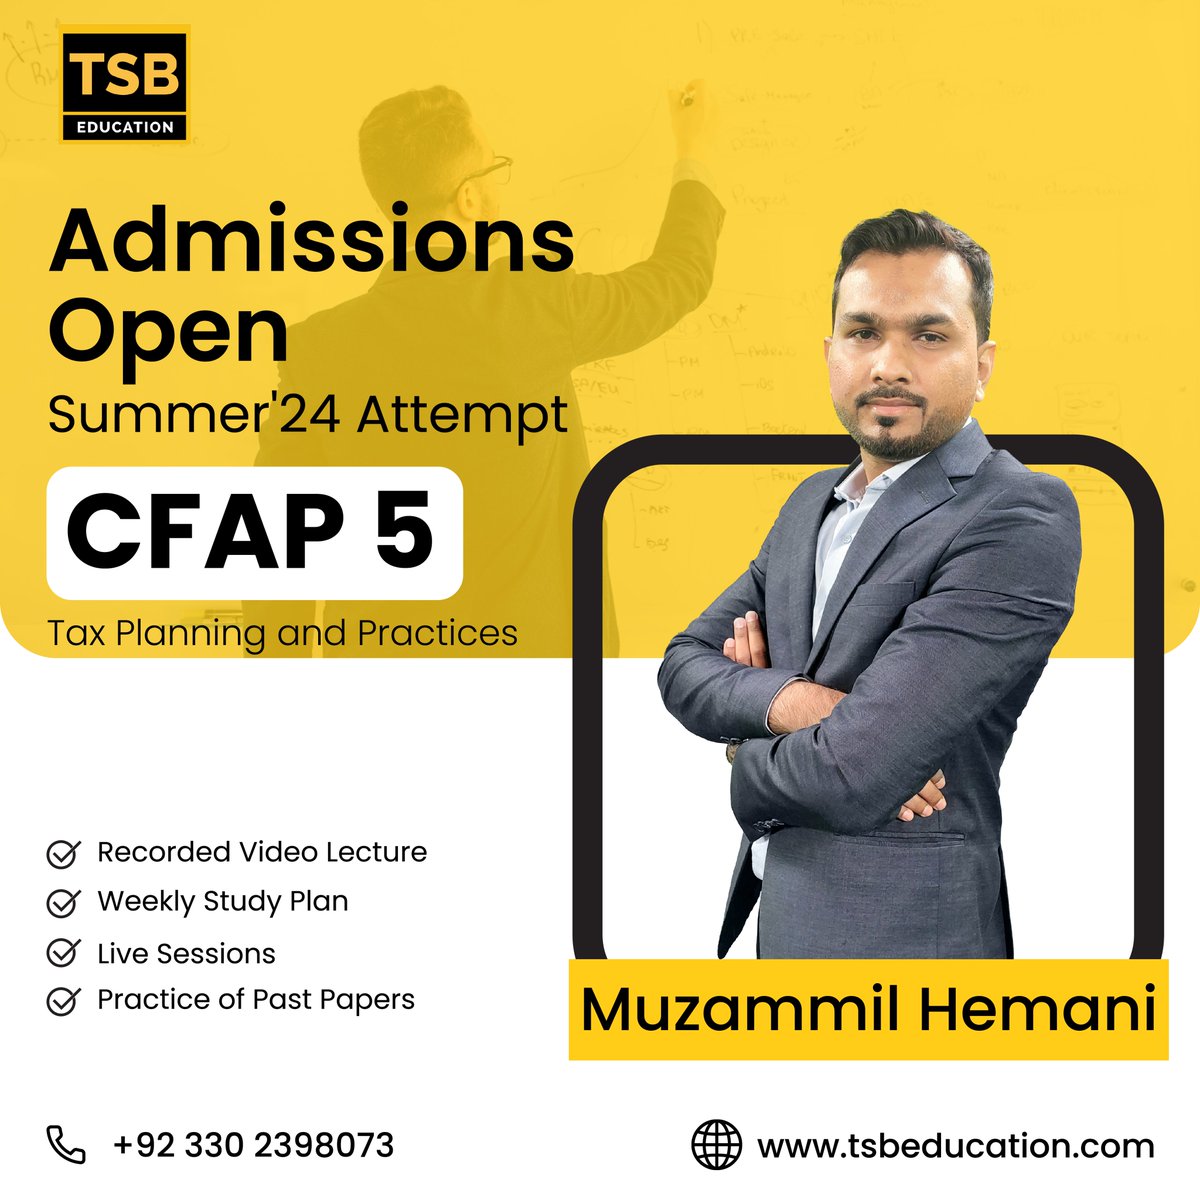 Join the new journey of learning with TSB Education! Enroll in our latest CFAP 5 batch led by the esteemed Sir Muzammil Hemani.

Grab your chance for a 10% discount. Enroll now!

#TSBEducation #CAPakistan #CFAP #premiumaccountancycourses #CAGlobal #Admissions